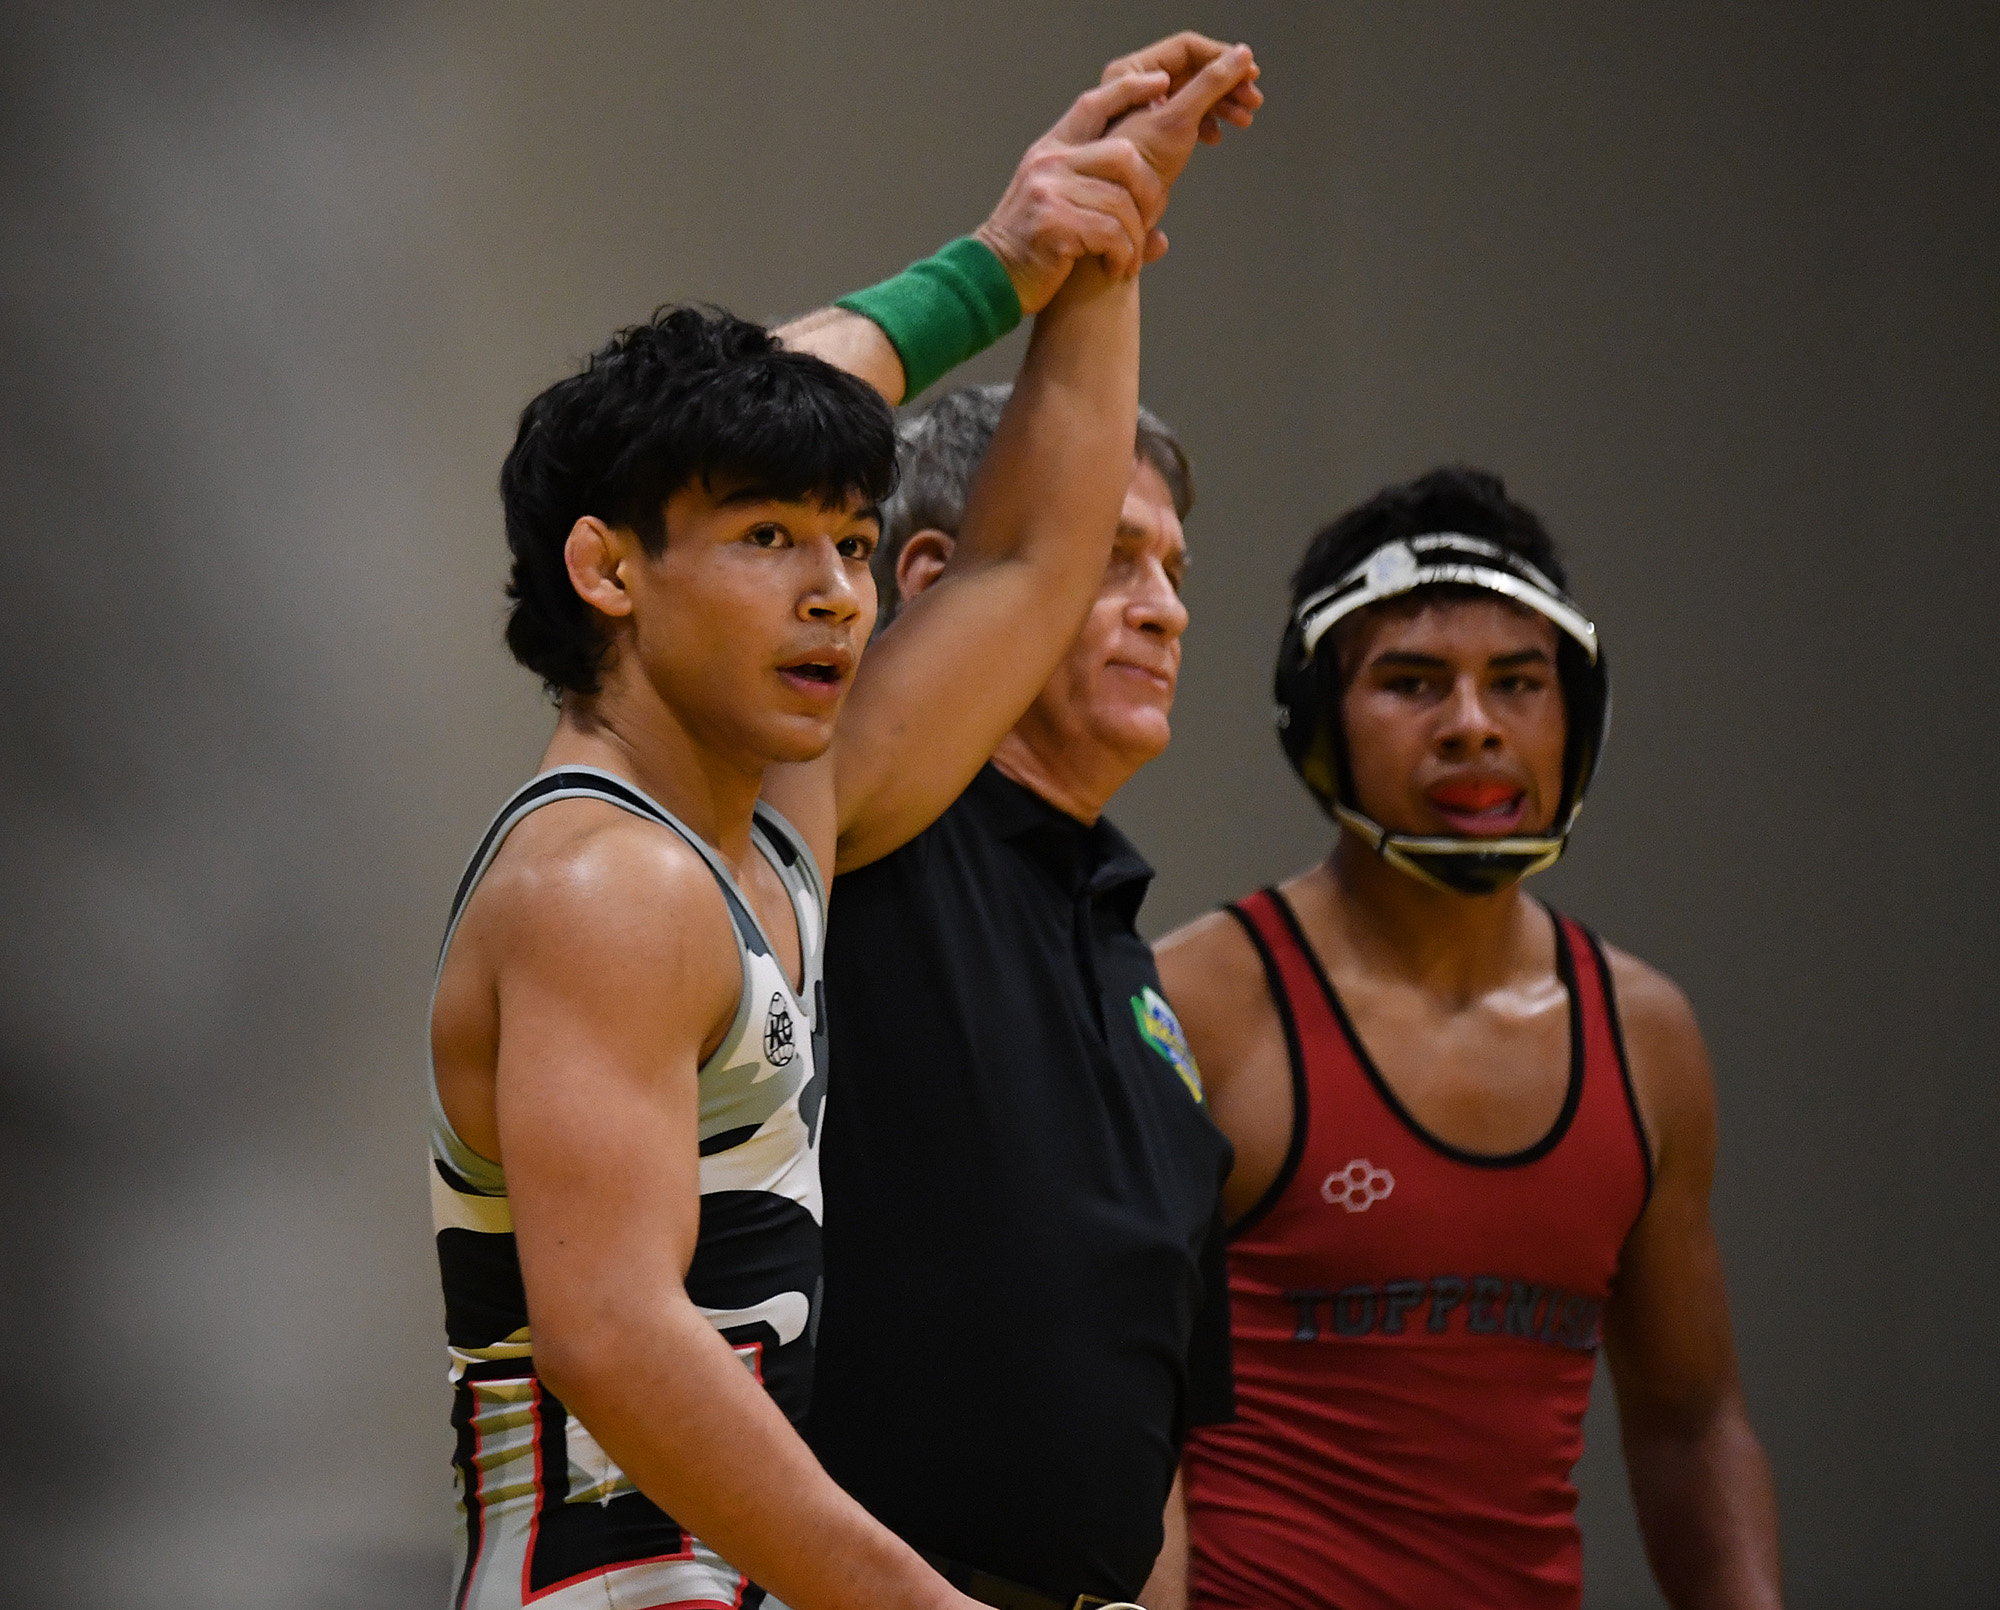 Union junior Noah Koyama is declared the winner of his bout with Toppenish sophomore Ruben Rios on Friday, Dec. 22, 2023, during a 138-pound champinoship bout at the Pac Coast Wrestling Championships at the Clark County Event Center in Ridgefield.